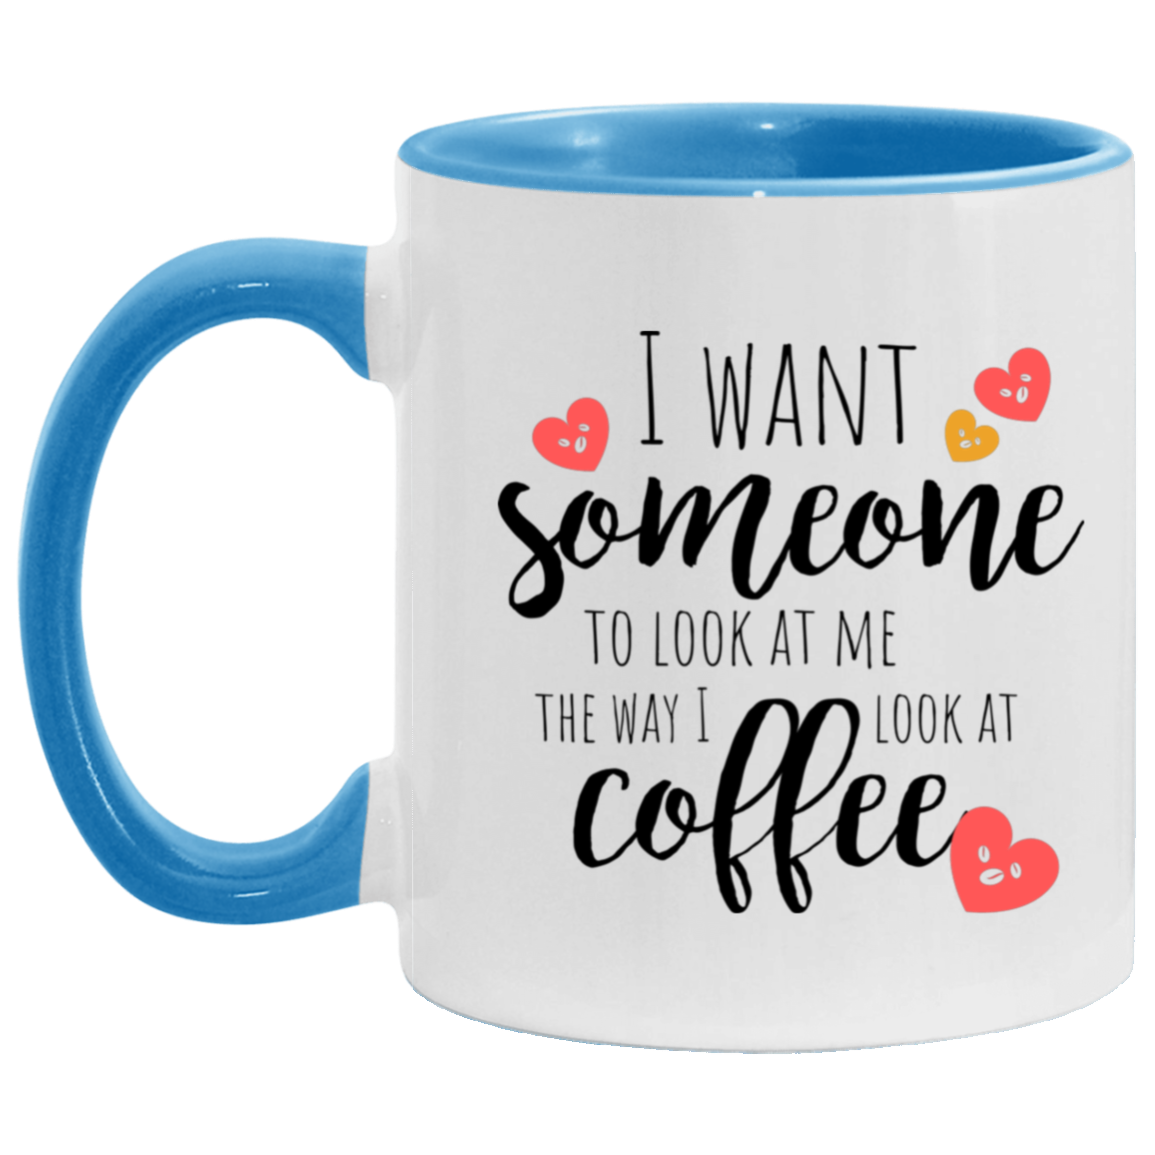 Gift For Everyday "Look At Me the way I look at Coffee" 11oz Accent Mug